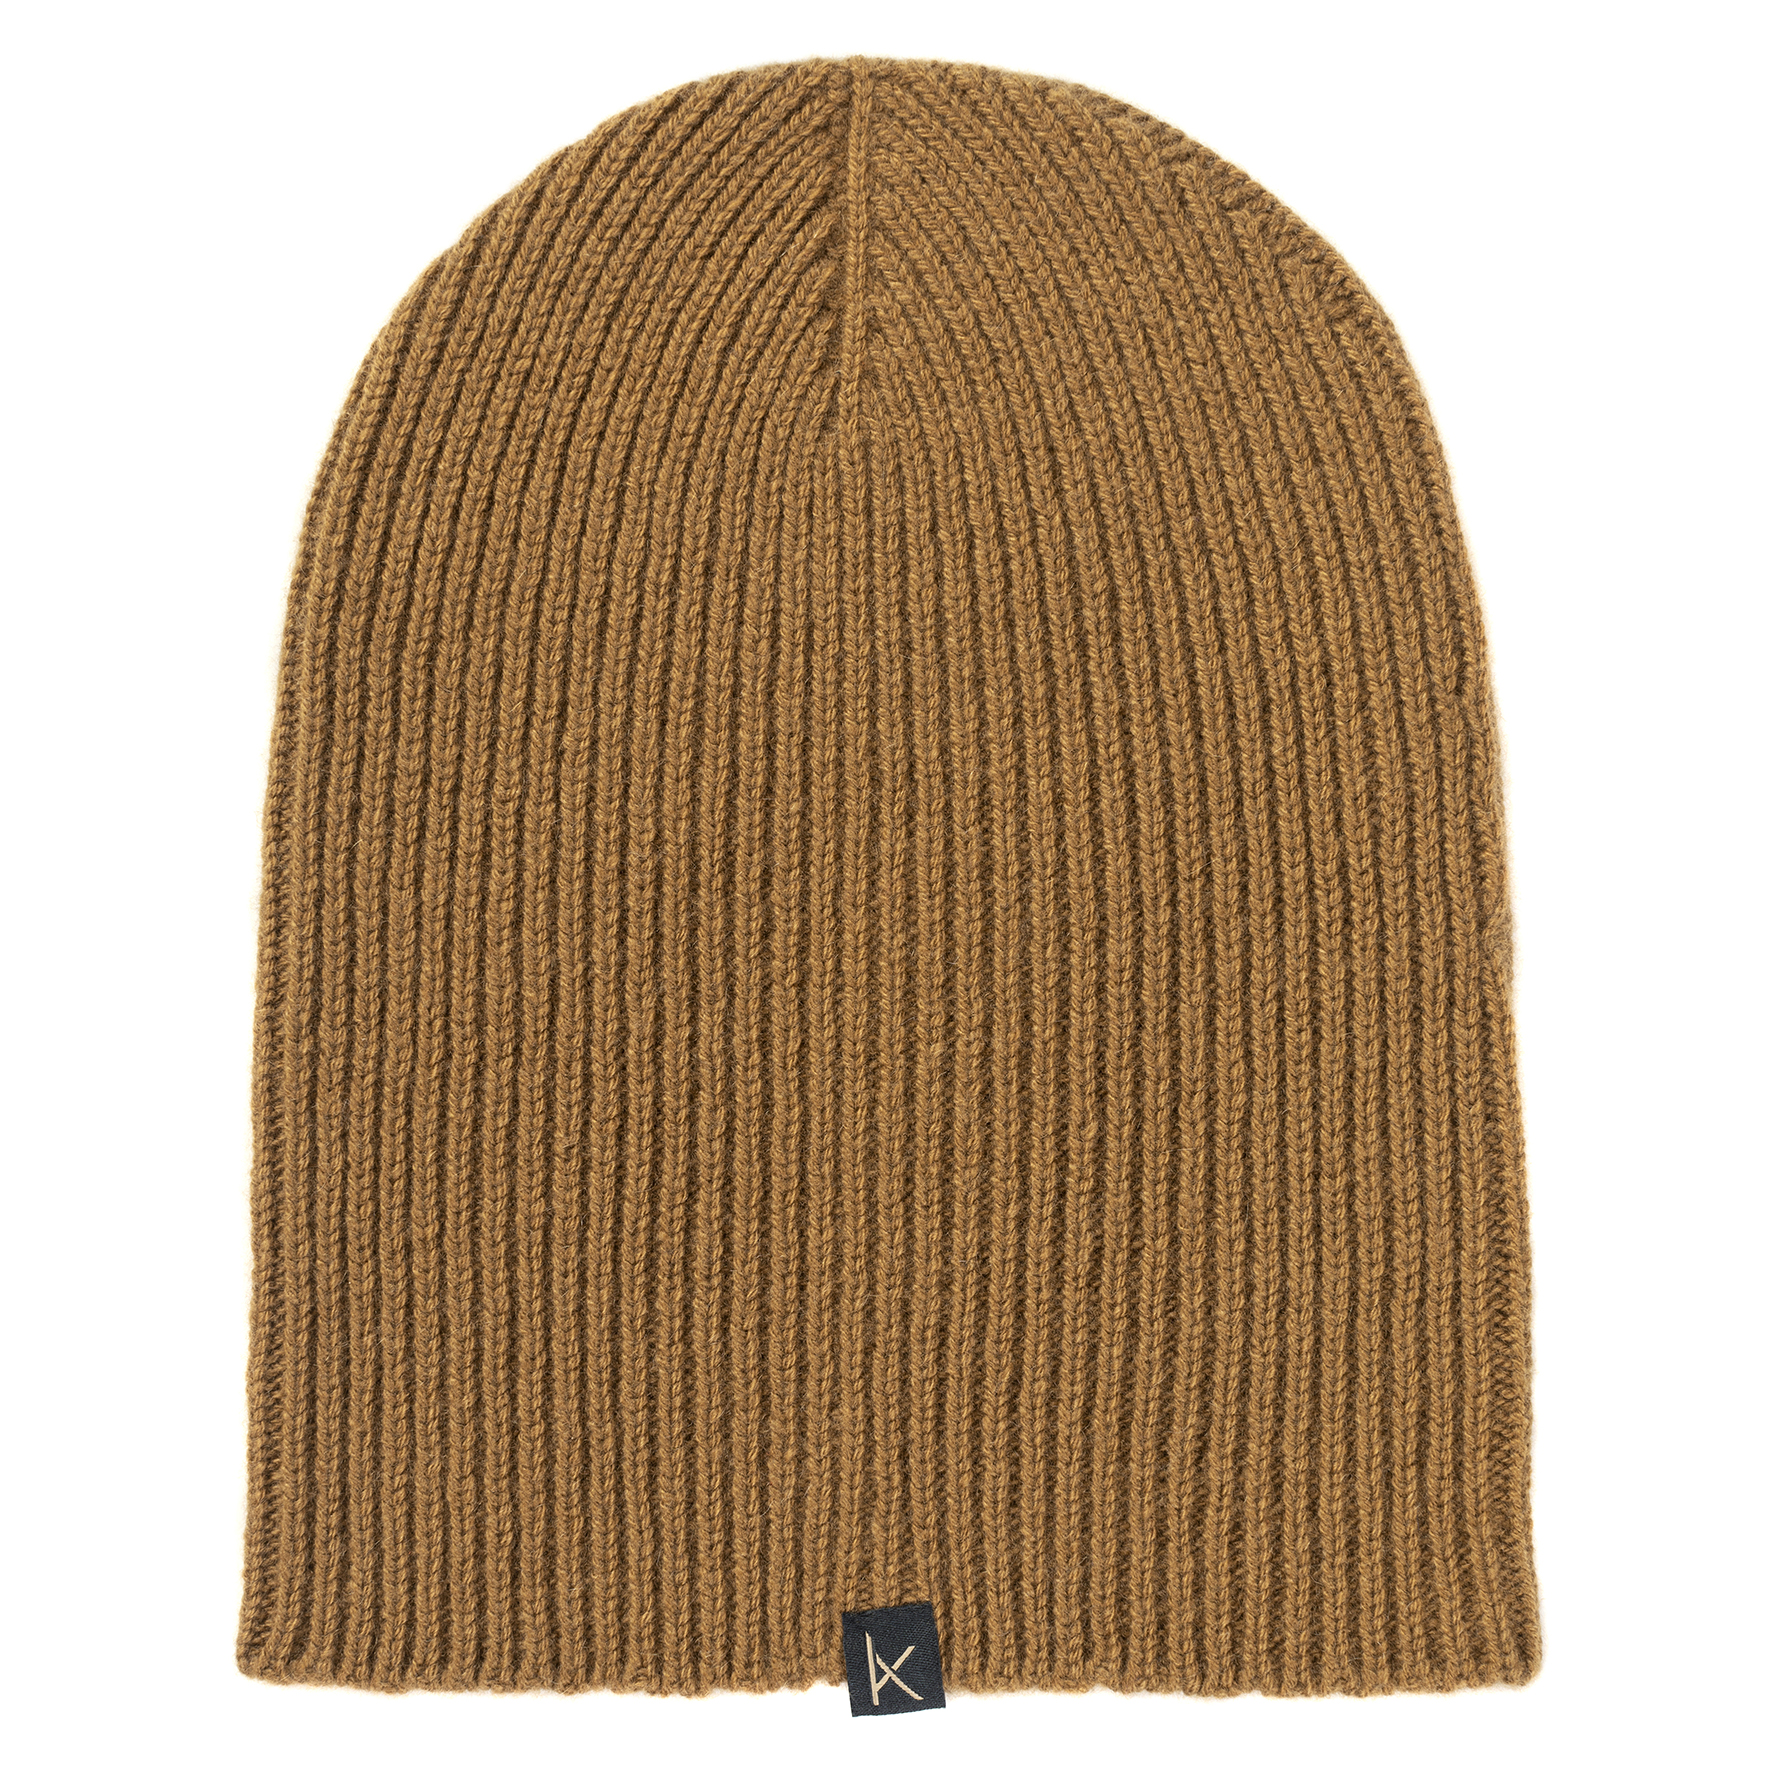 Vicuna Deluxe Knitted Cashmere Beanie Hat